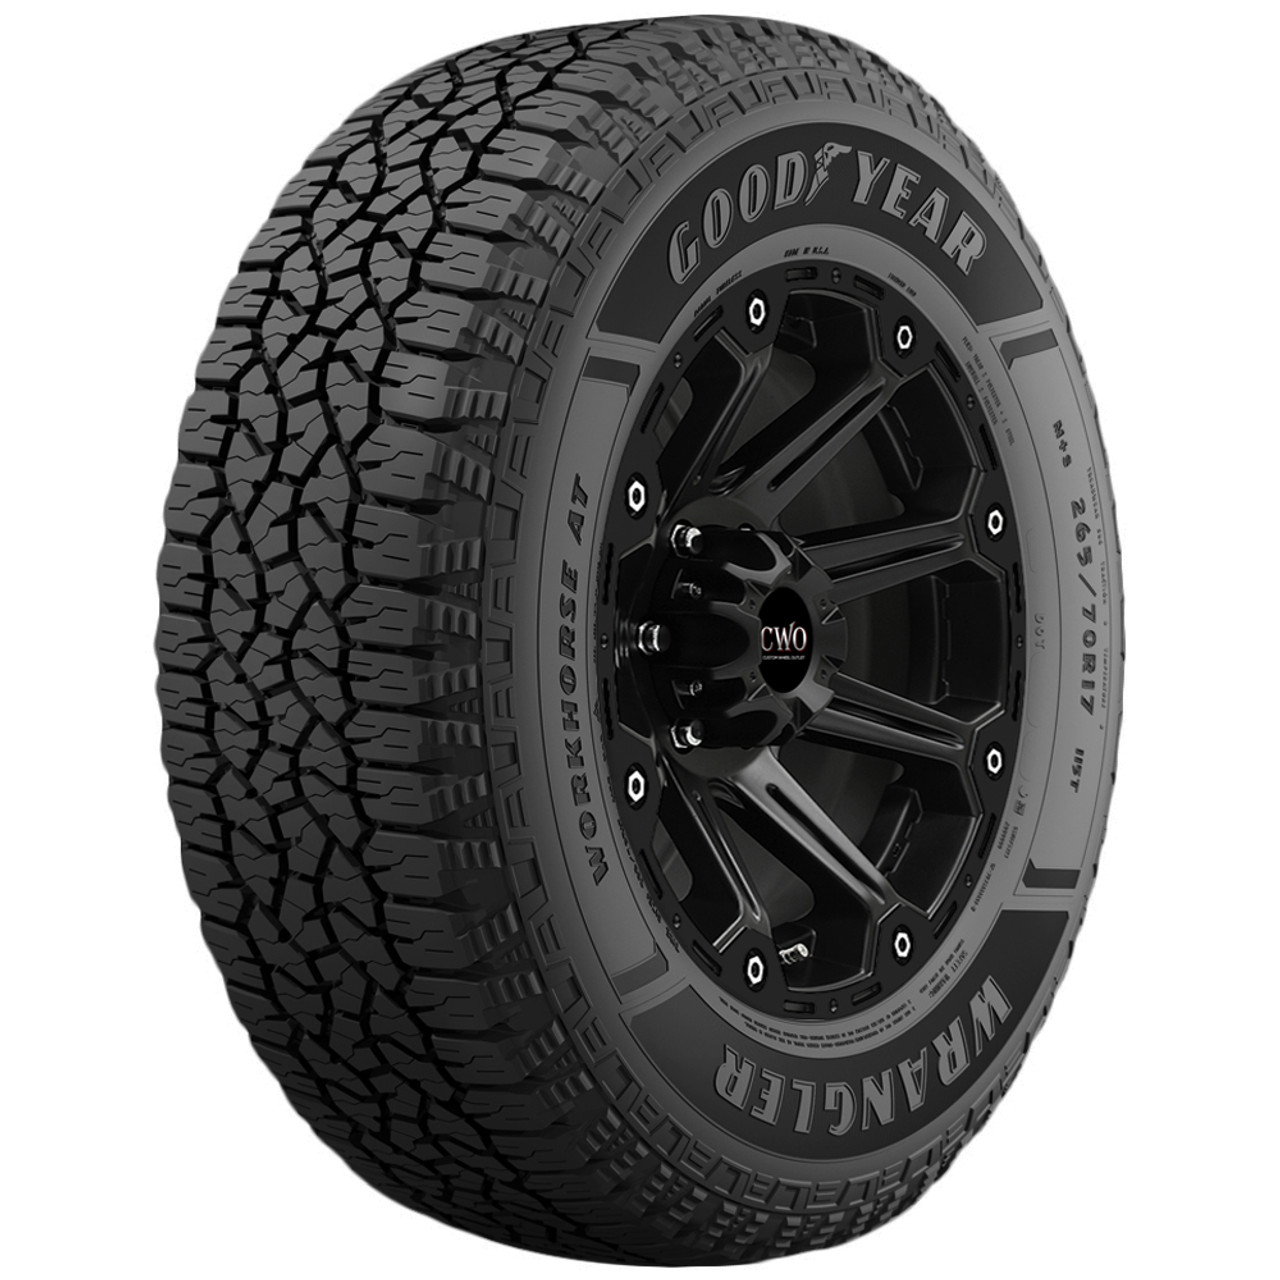 265/70R18 Goodyear Wrangler Workhorse AT 116T SL/4 Ply White Letter Tire  480070856 - ShopCWO